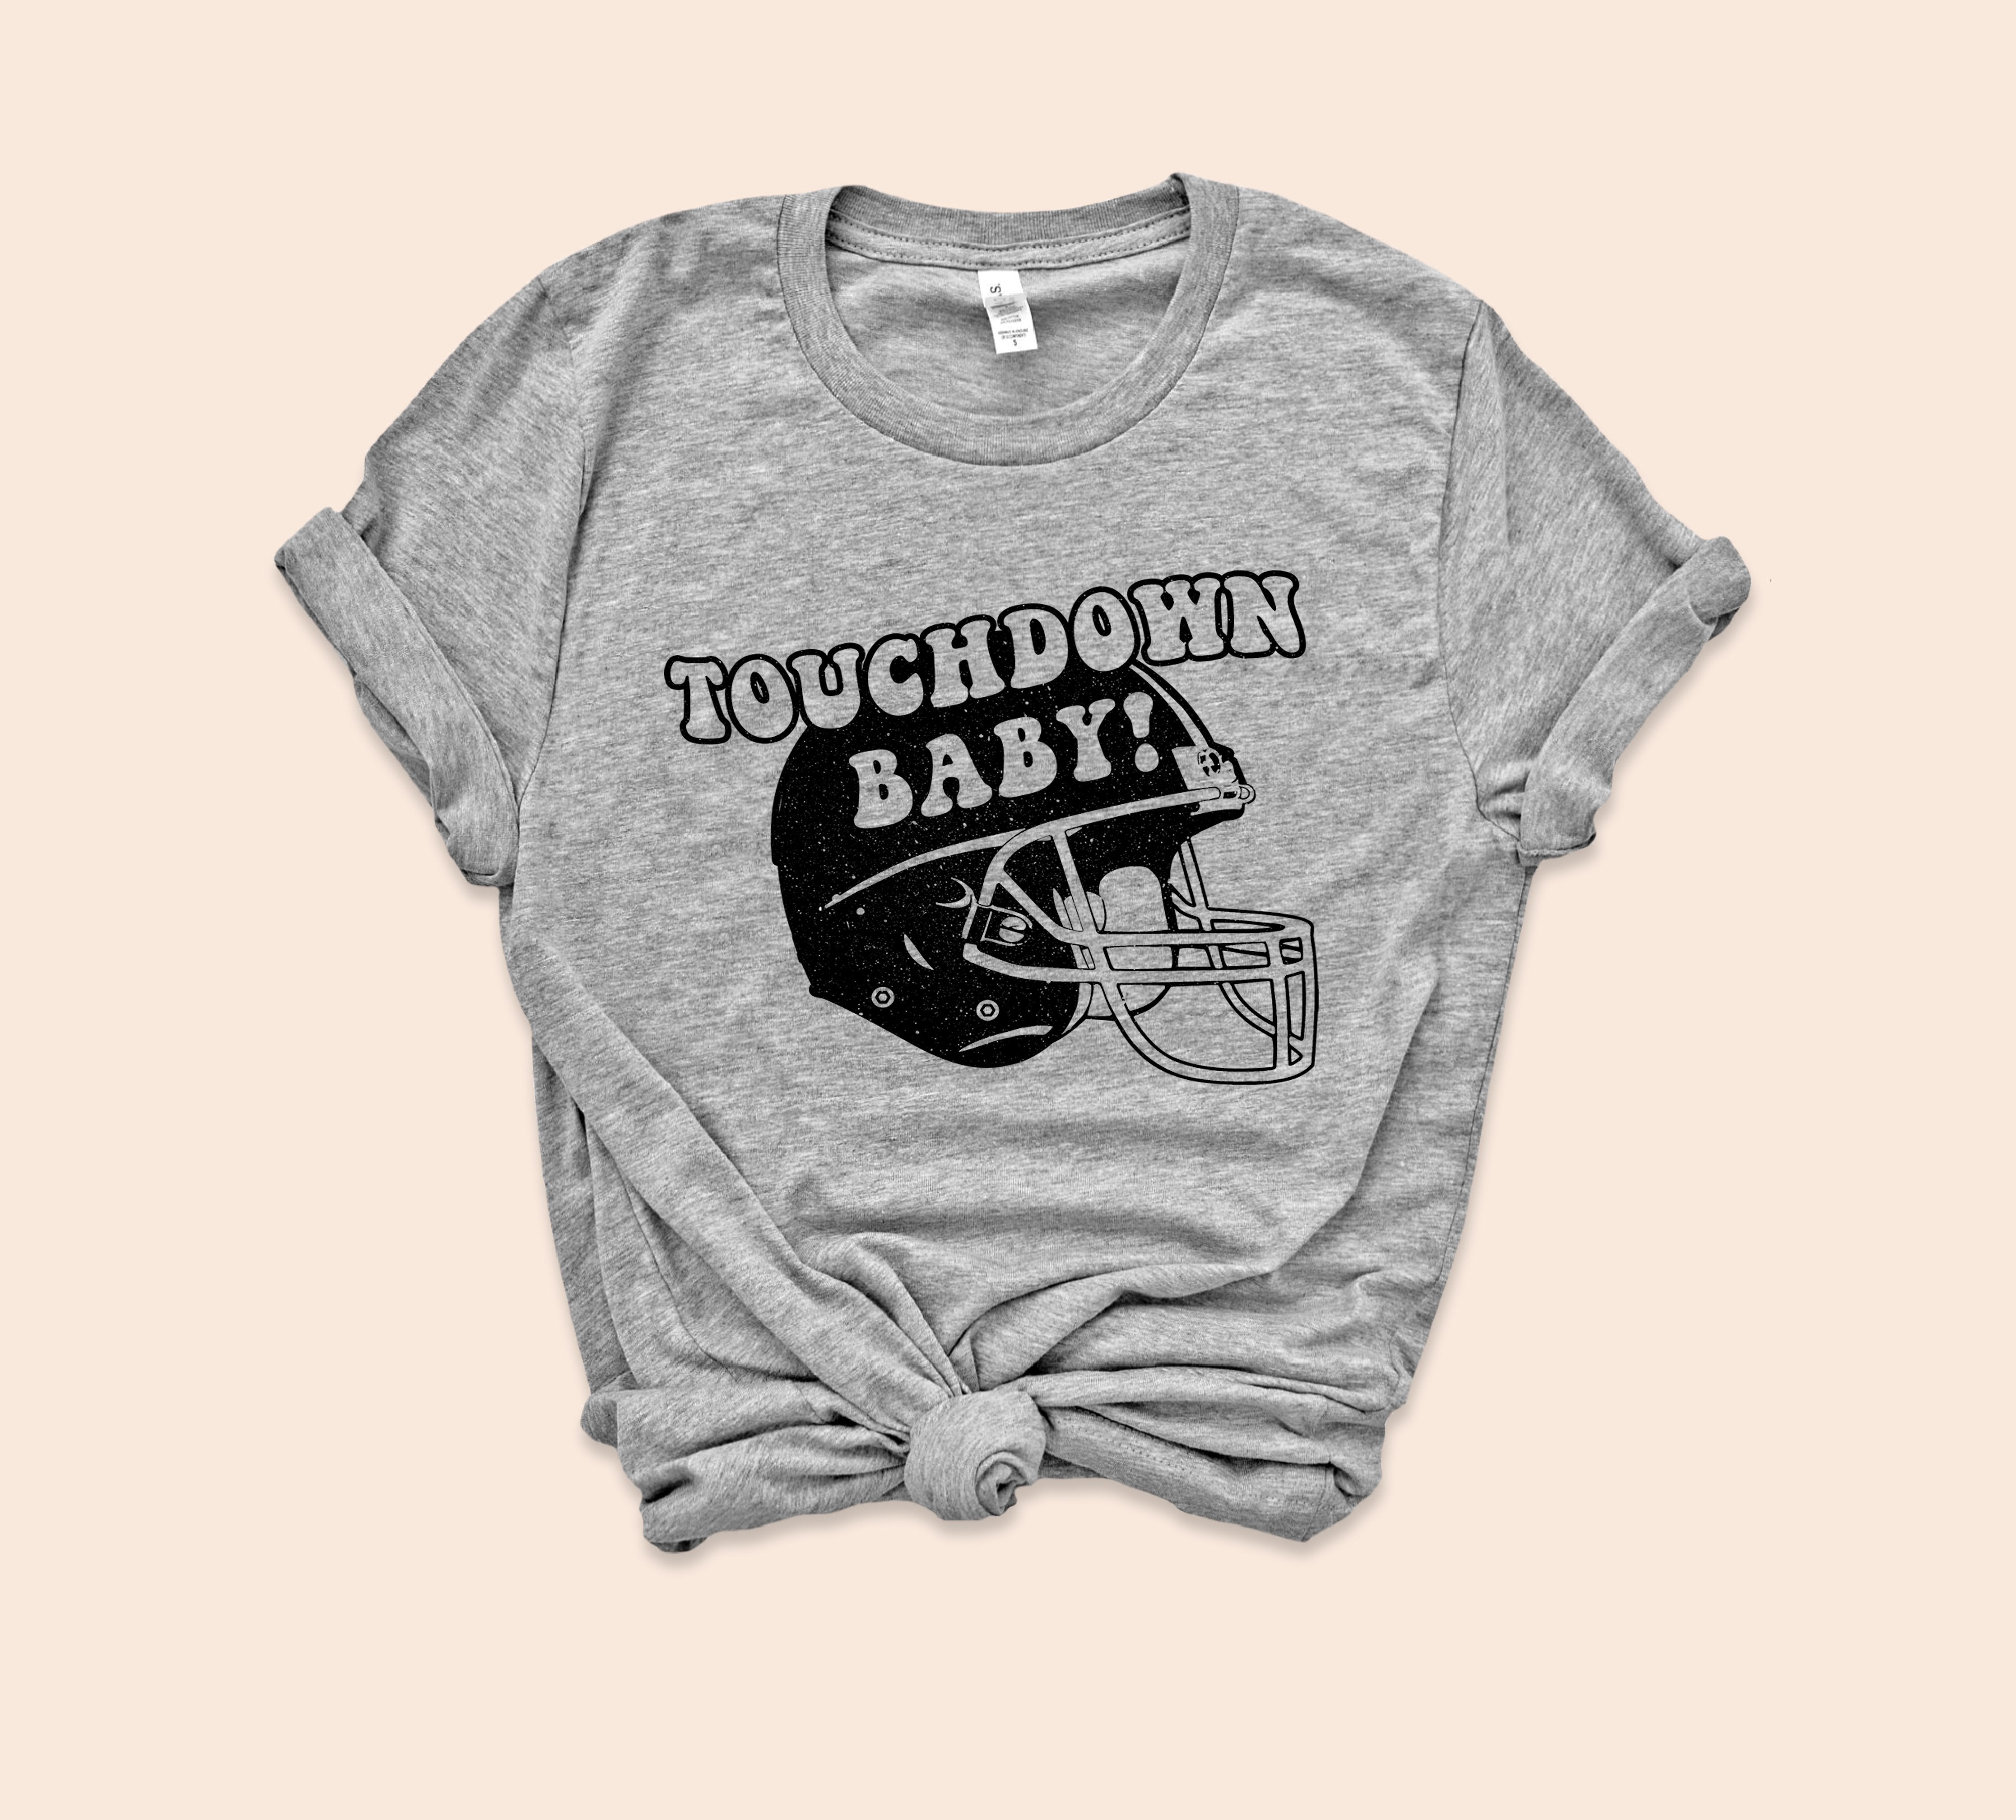 Heather grey shirt with football helmet that says touchdown baby - HighCiti